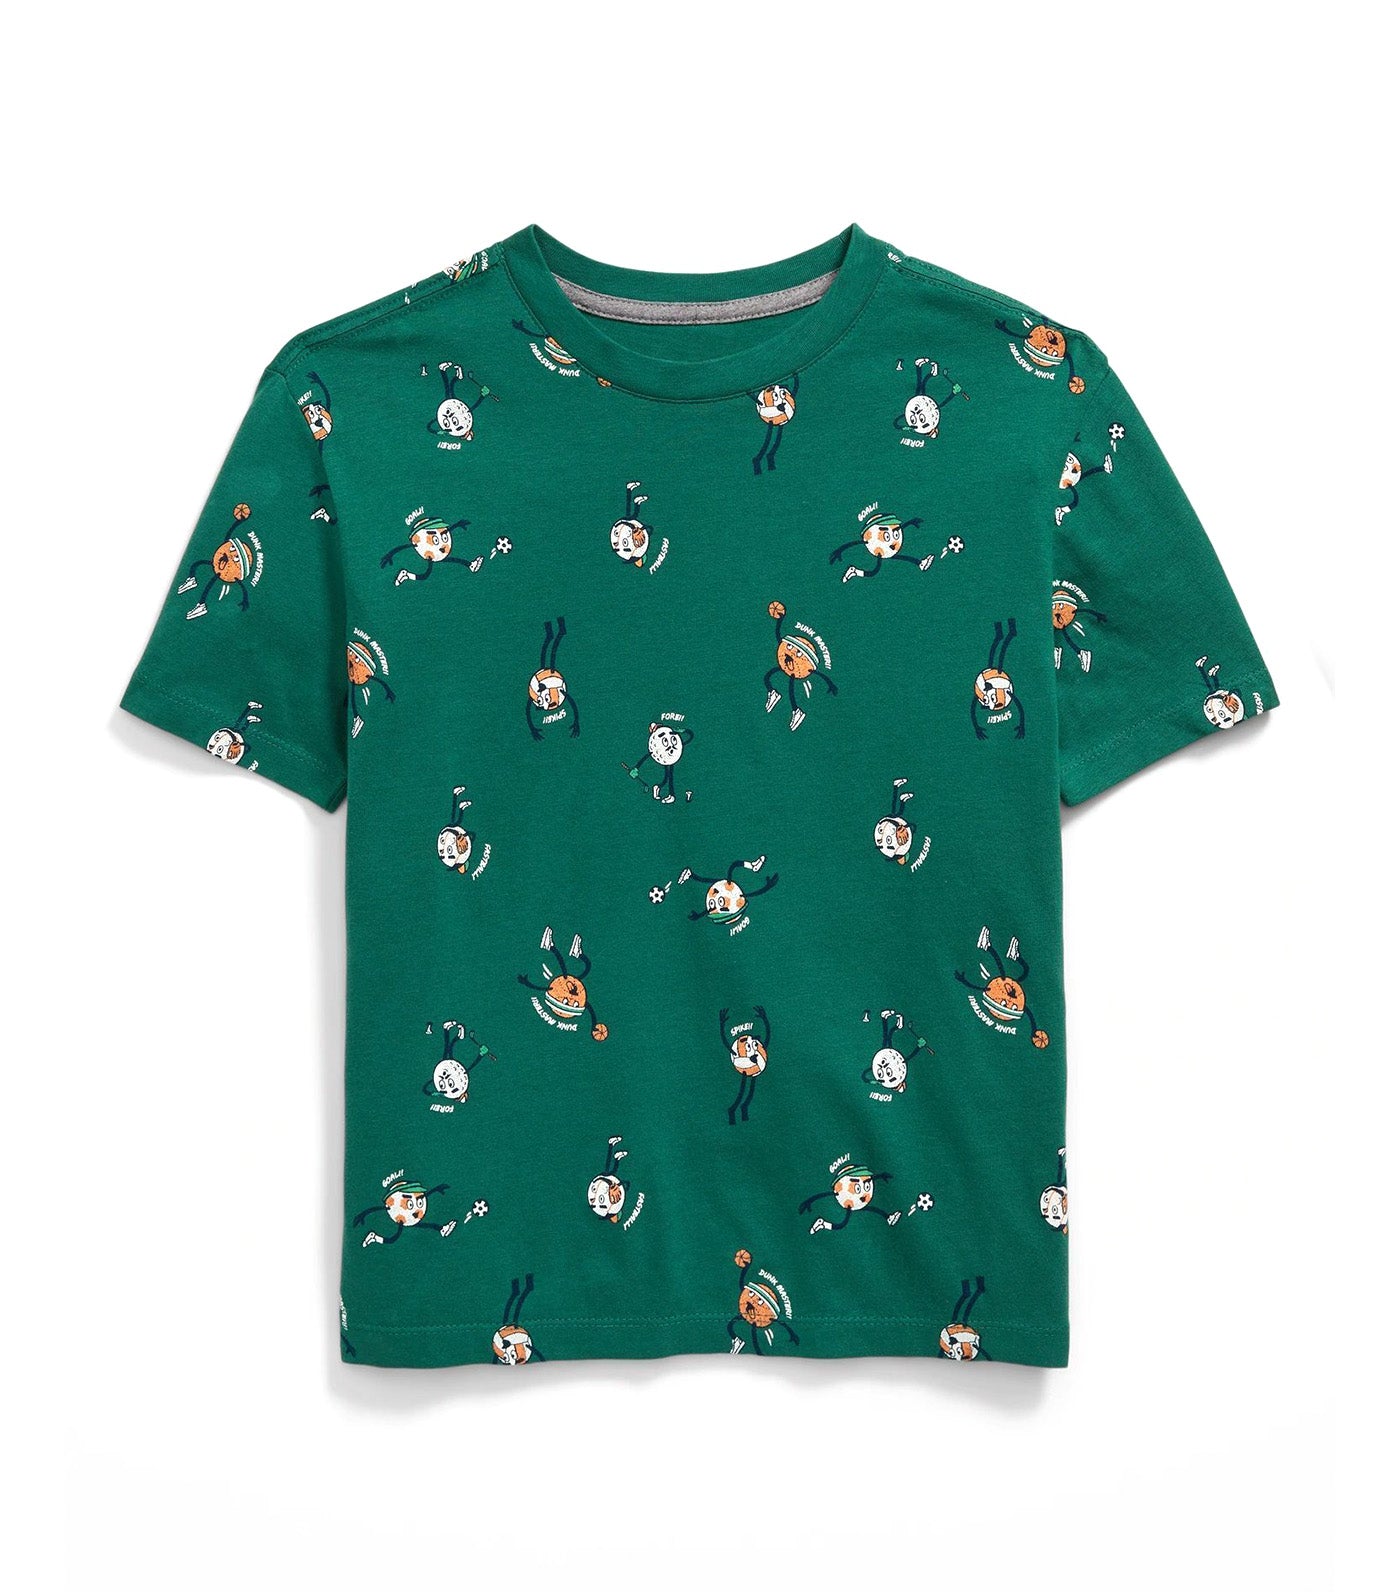 Softest Printed Crew-Neck T-Shirt for Boys Sports